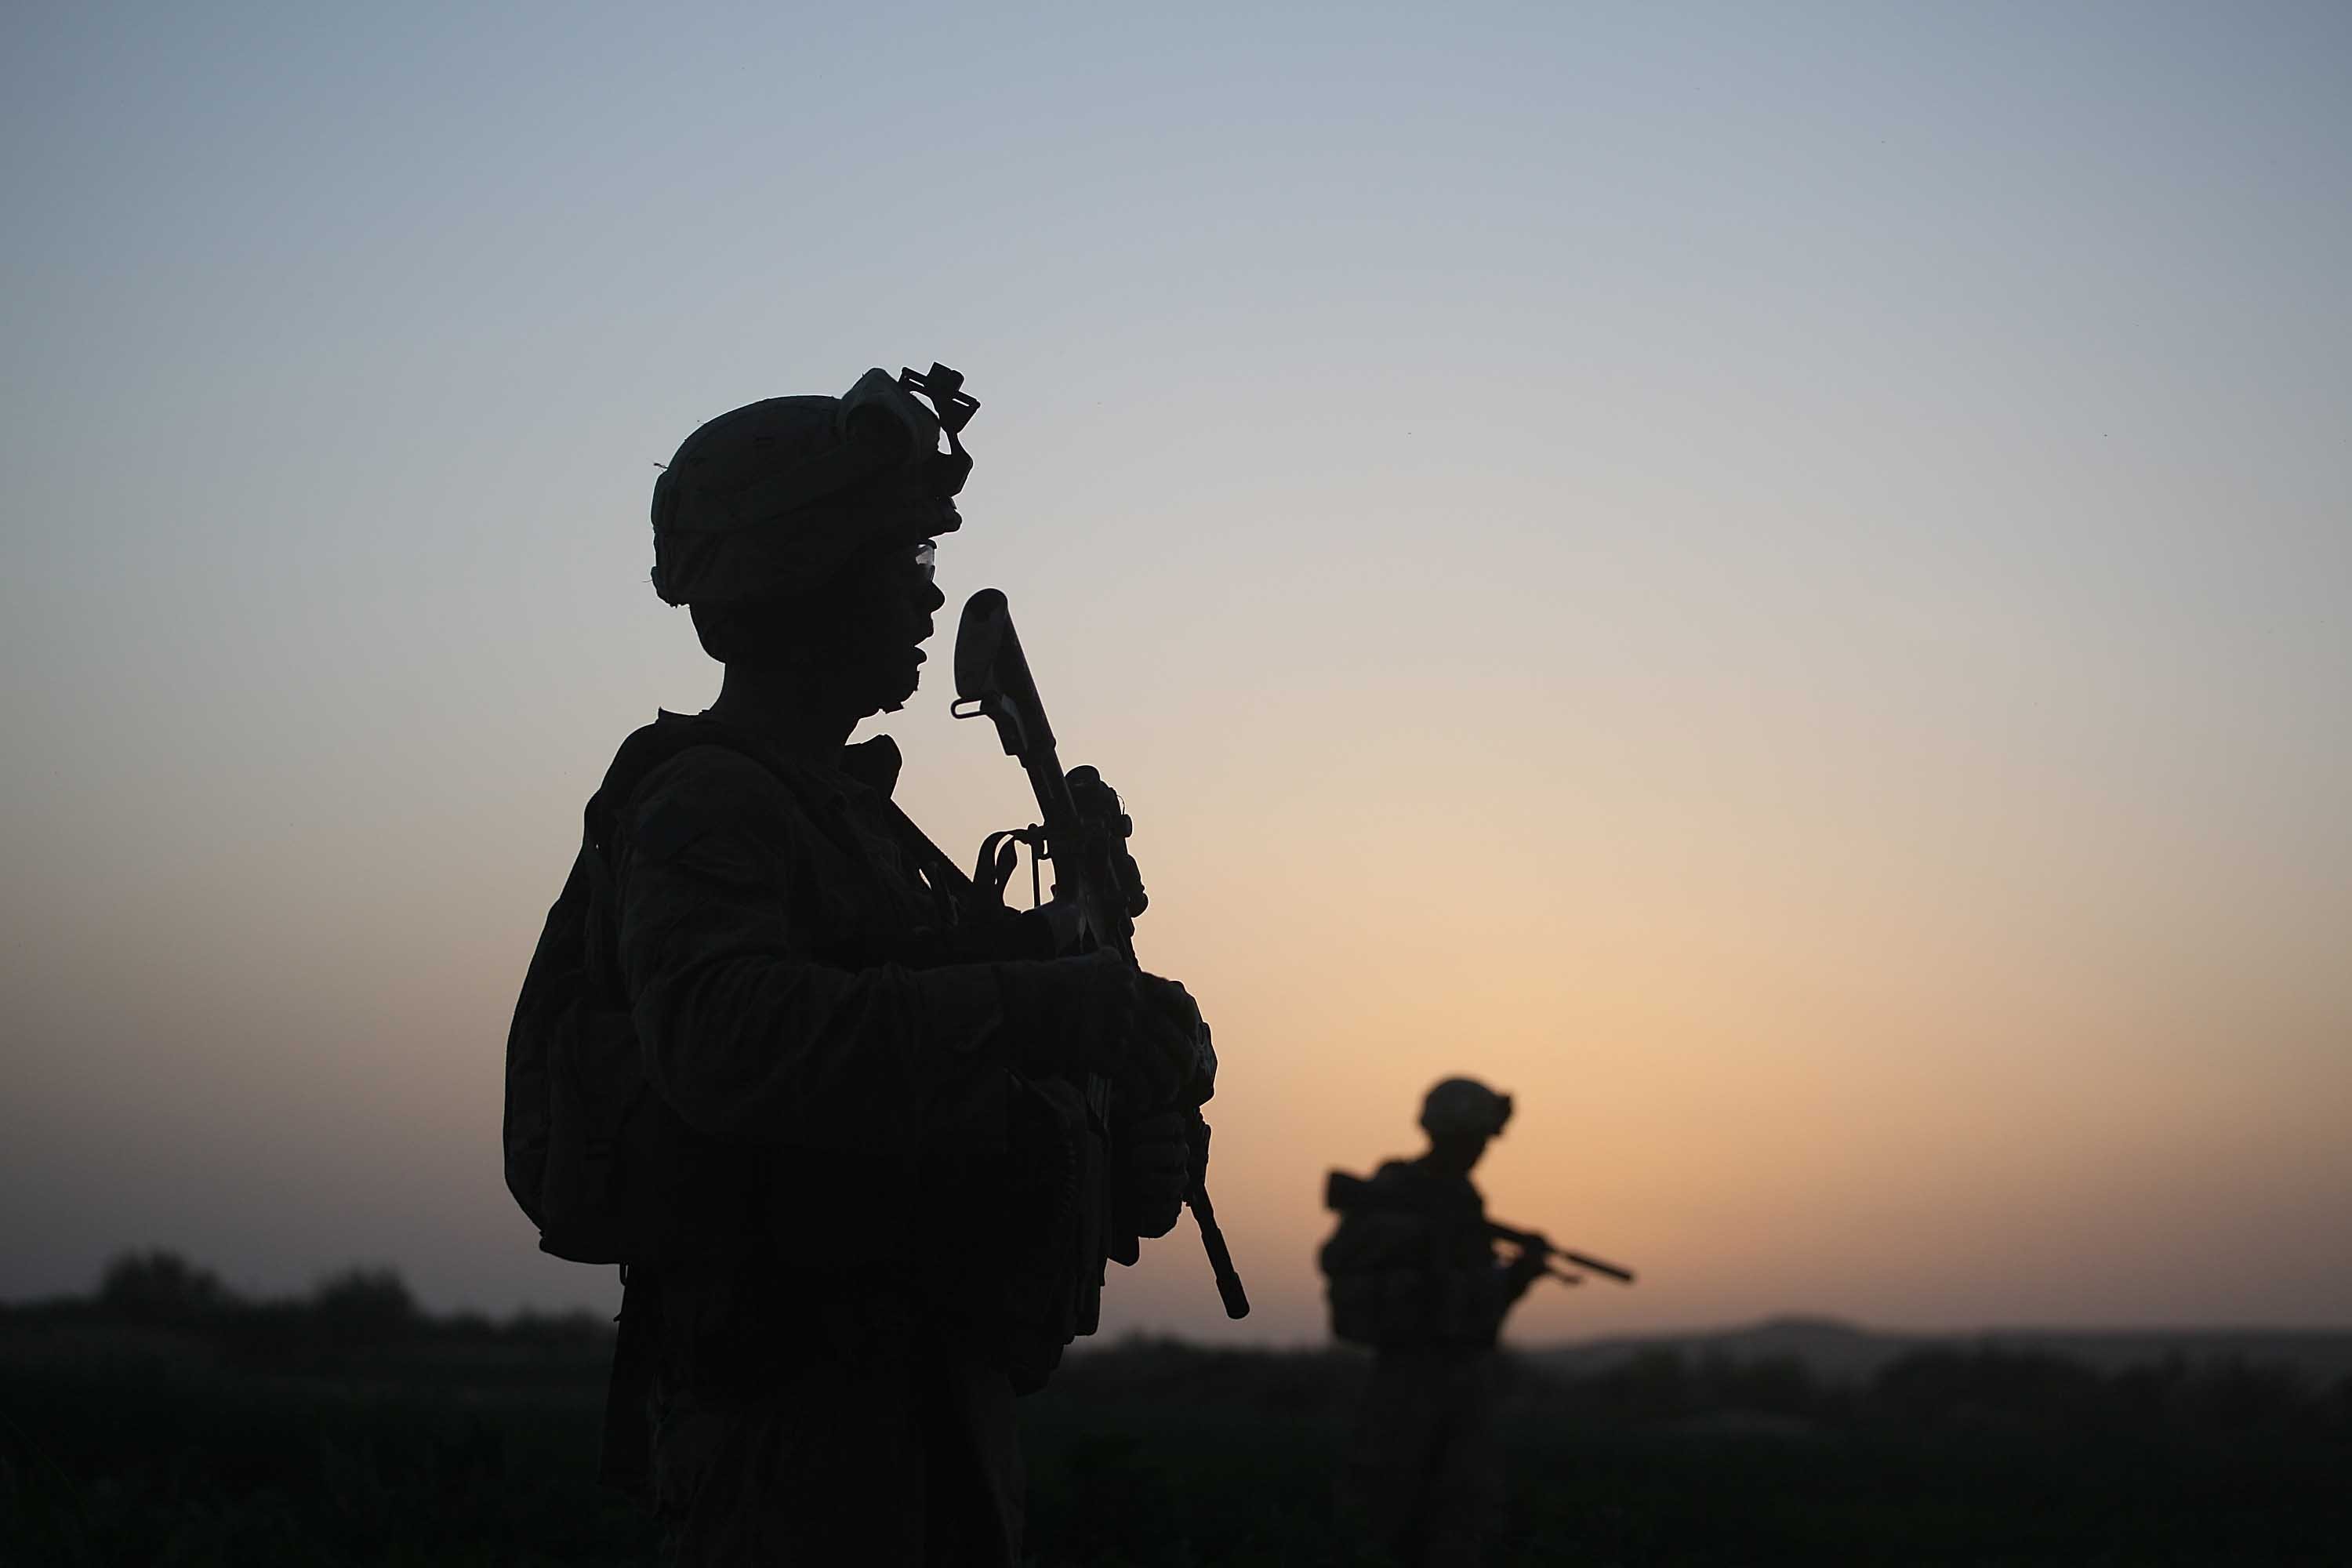 U.S. Marines with the 2nd Marine Expeditionary Brigade, RCT 2nd Battalion 8th Marines Echo Co. step off in the early morning during an operation to push out Taliban fighters on July 18, 2009 in Herati, Afghanistan | Getty Images: Photos